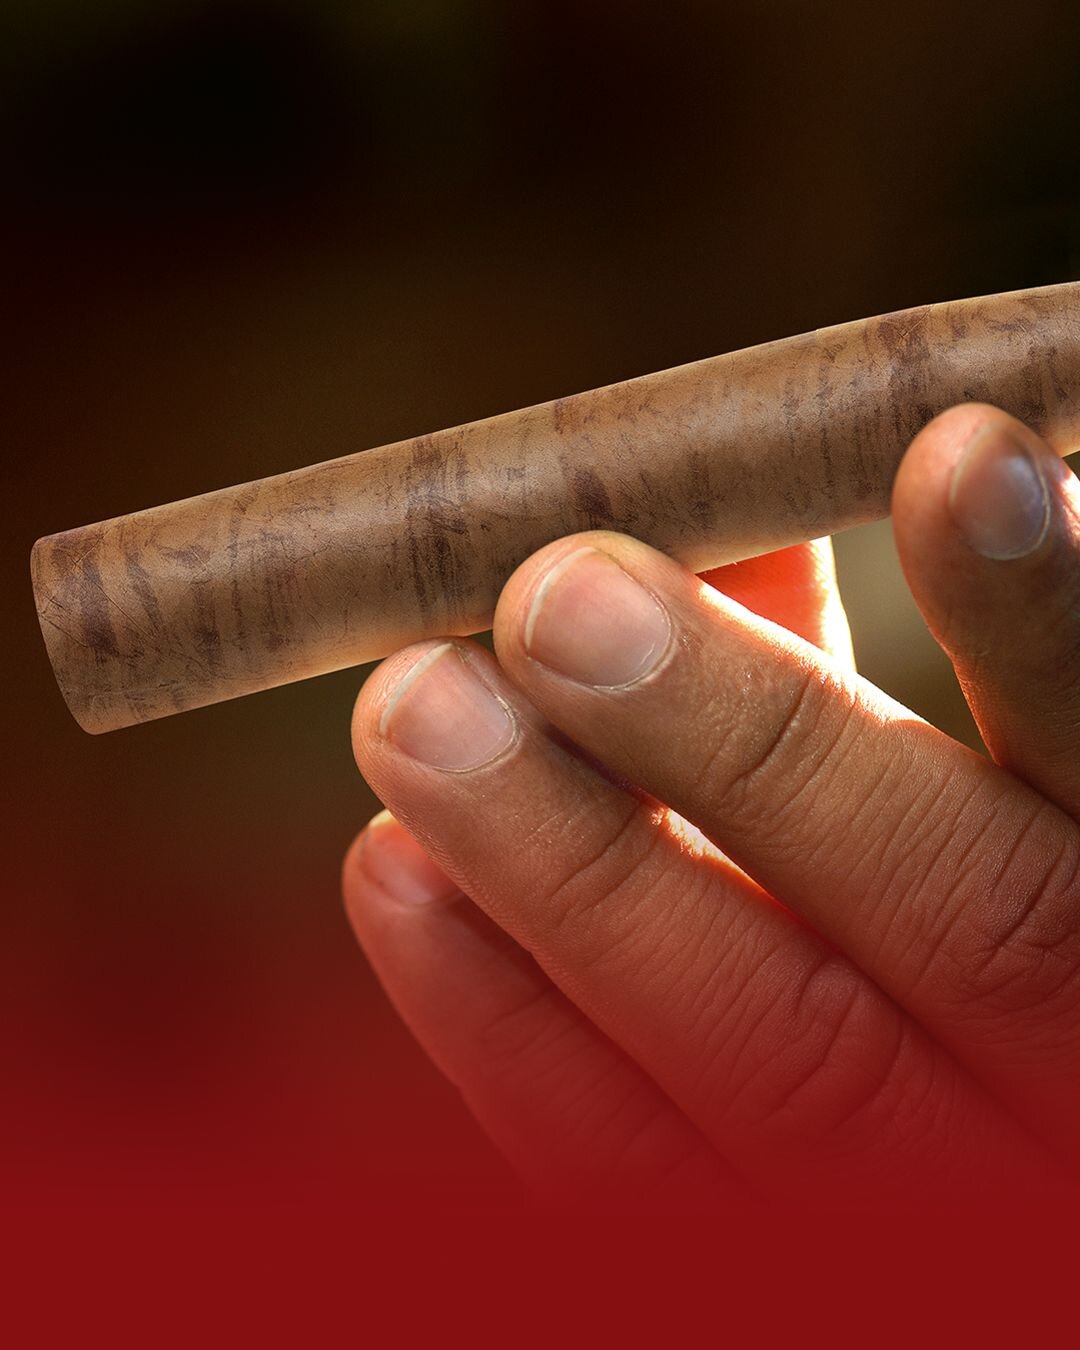 Hand holding piramides cigar with subtle stripe pattern - Text in picture: After a couple of days, we carefully remove the tobacco veins from the leaves.